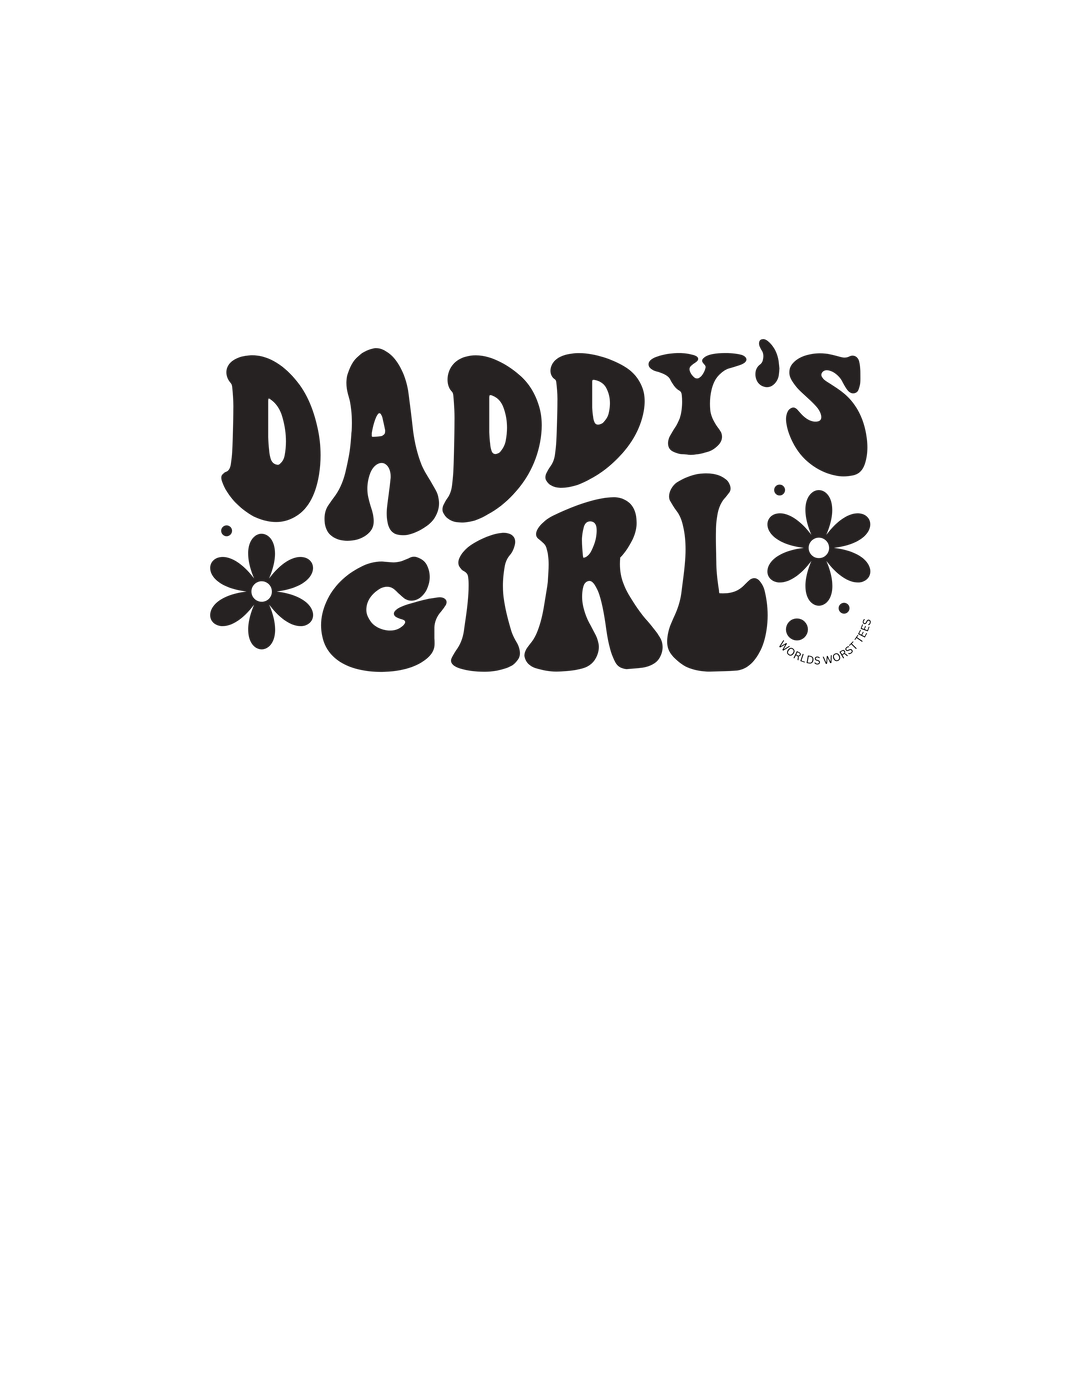 A black graphic tee featuring the text Daddy's Girl in a stylish font, perfect for toddlers. Made of soft, durable 100% combed ringspun cotton, with a classic fit and tear-away label.